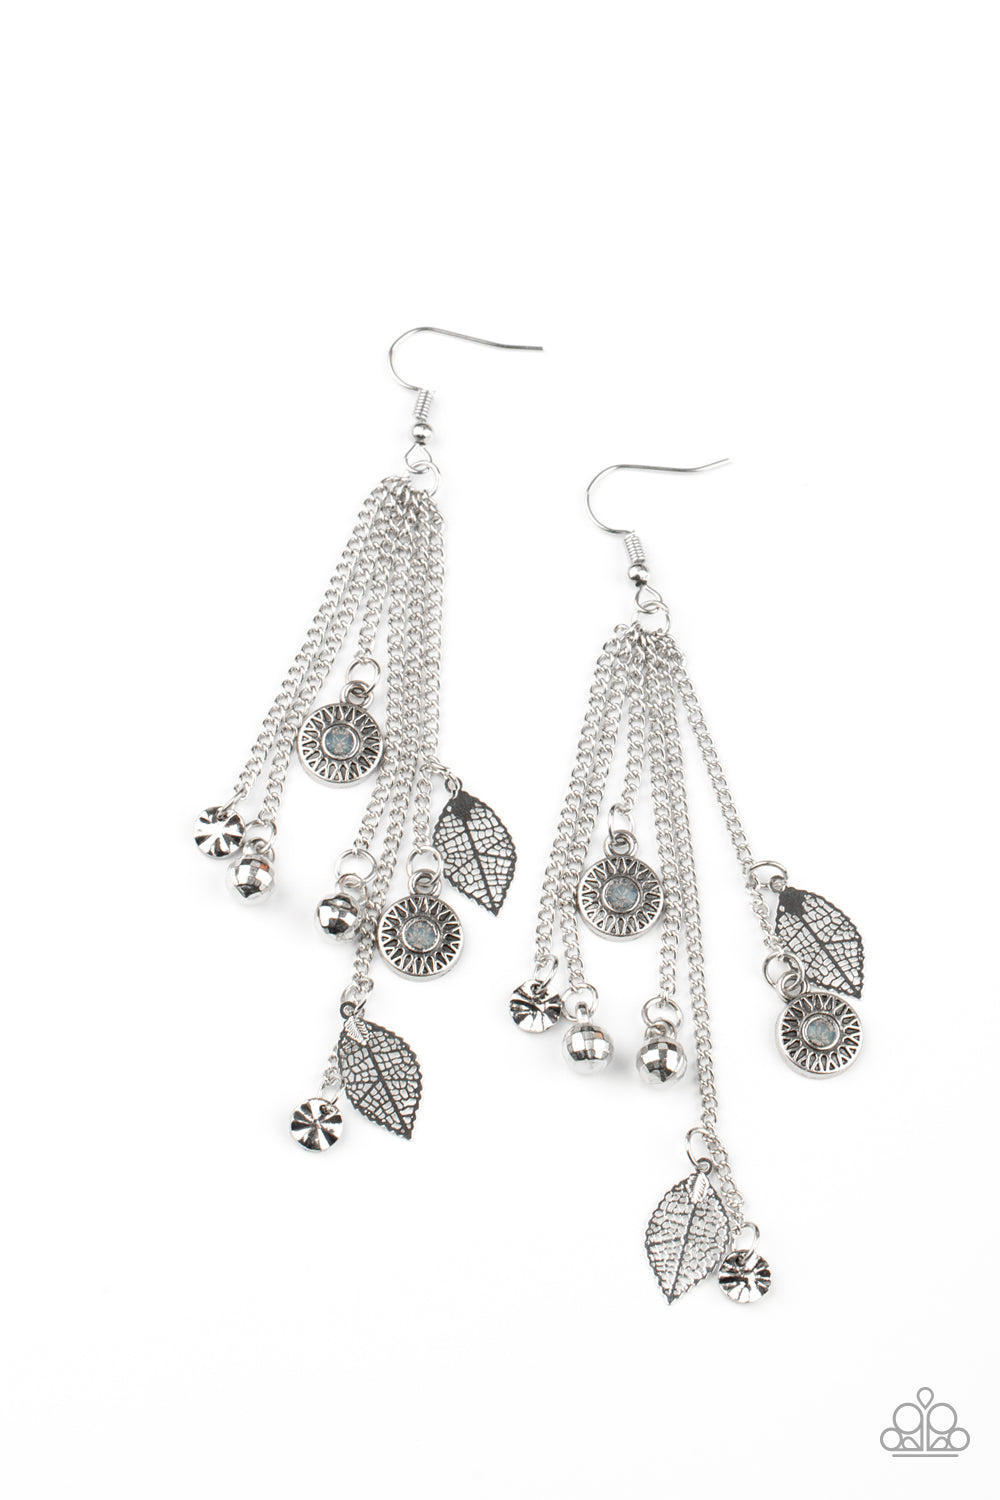 Paparazzi - A Natural Charmer - Silver Earrings